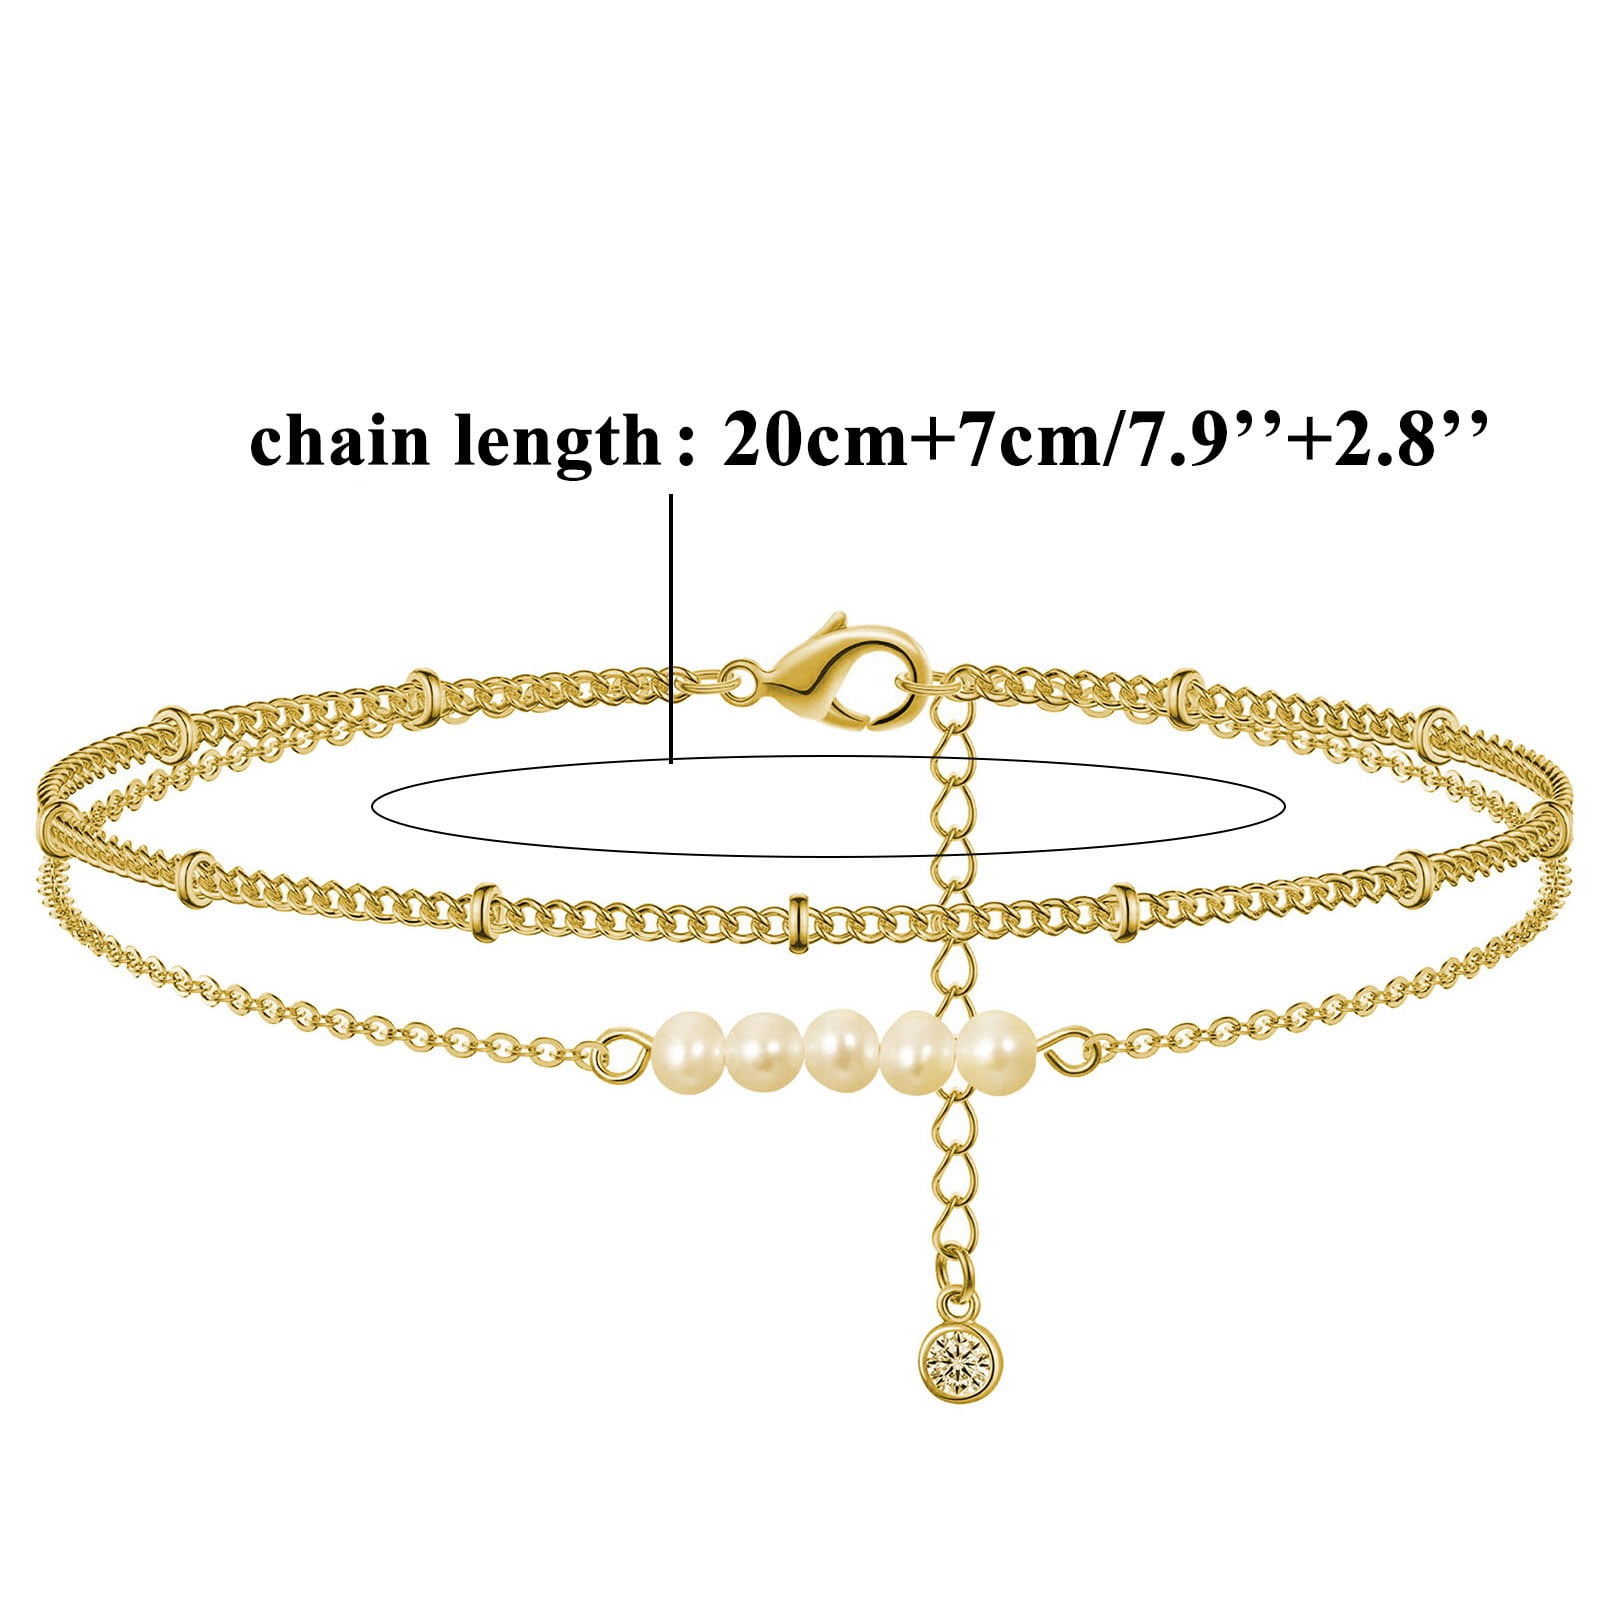 beads pendant double anklets keusn for bracelet pearl ankle bracelet layer h gold women beach boho chains foot anklets